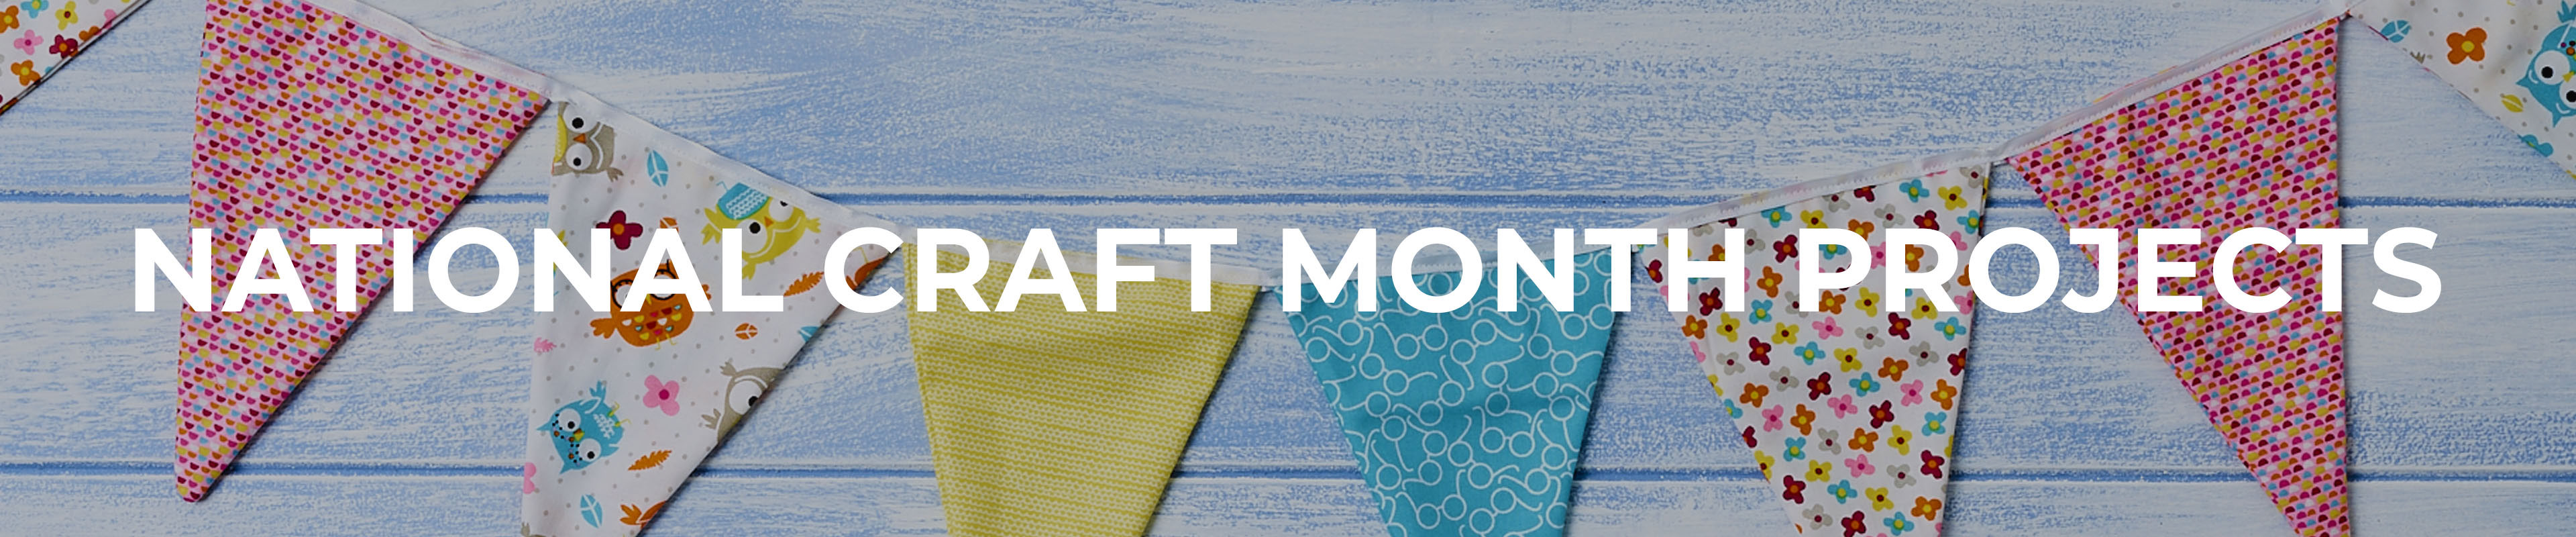 National Craft Month Projects